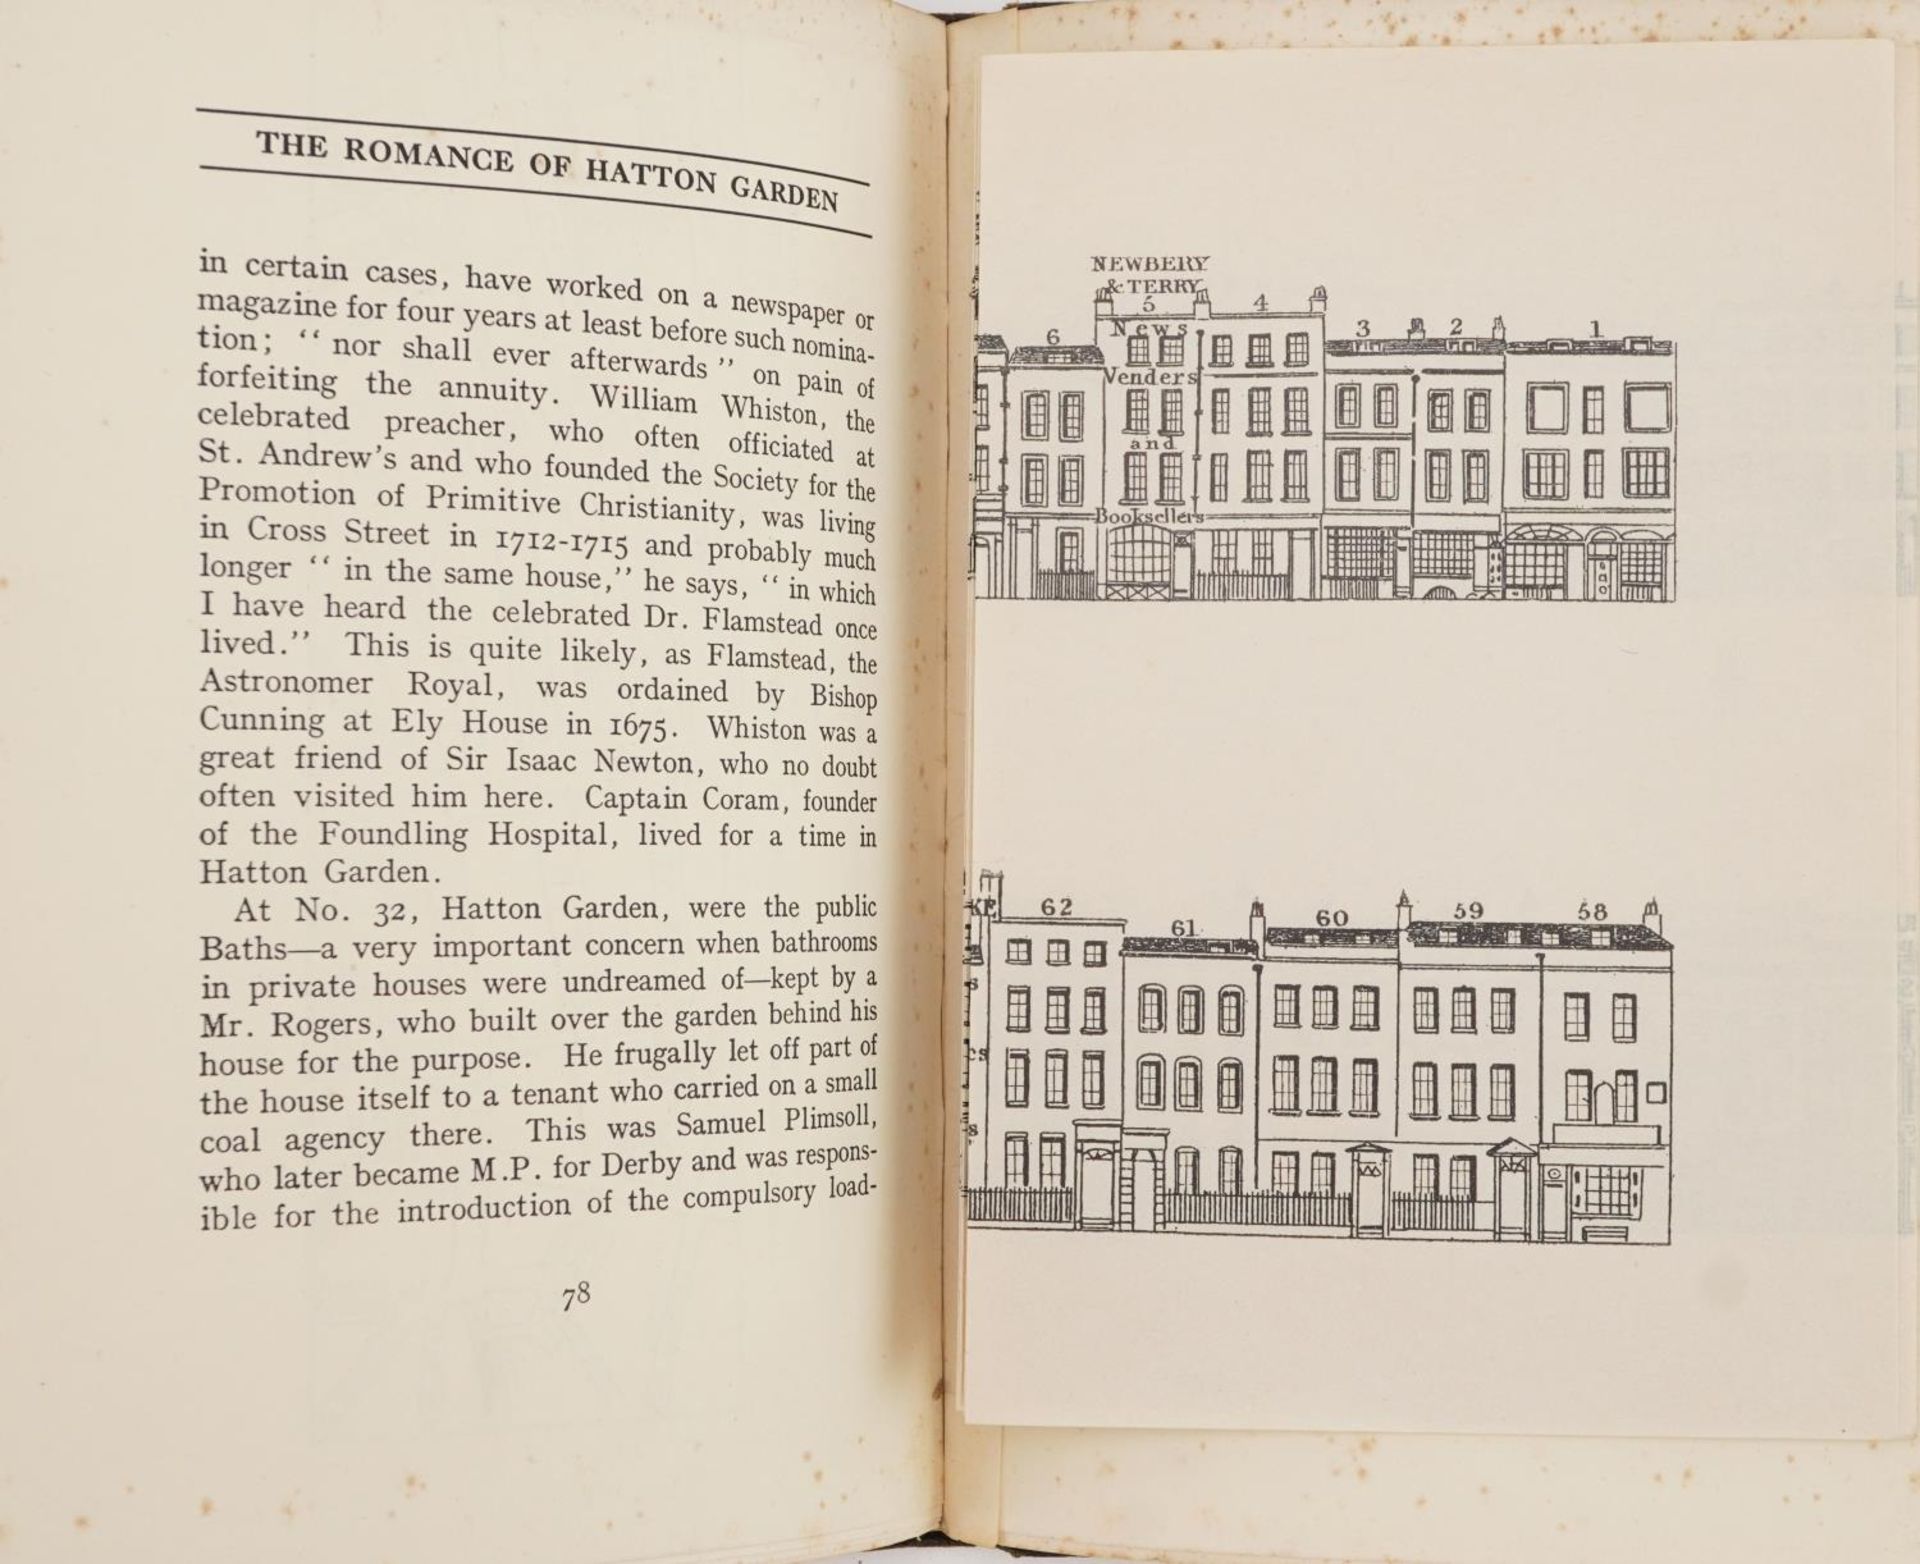 The Romance of Hatton Garden with black and white plates and fold out street map, first edition by - Image 8 of 9